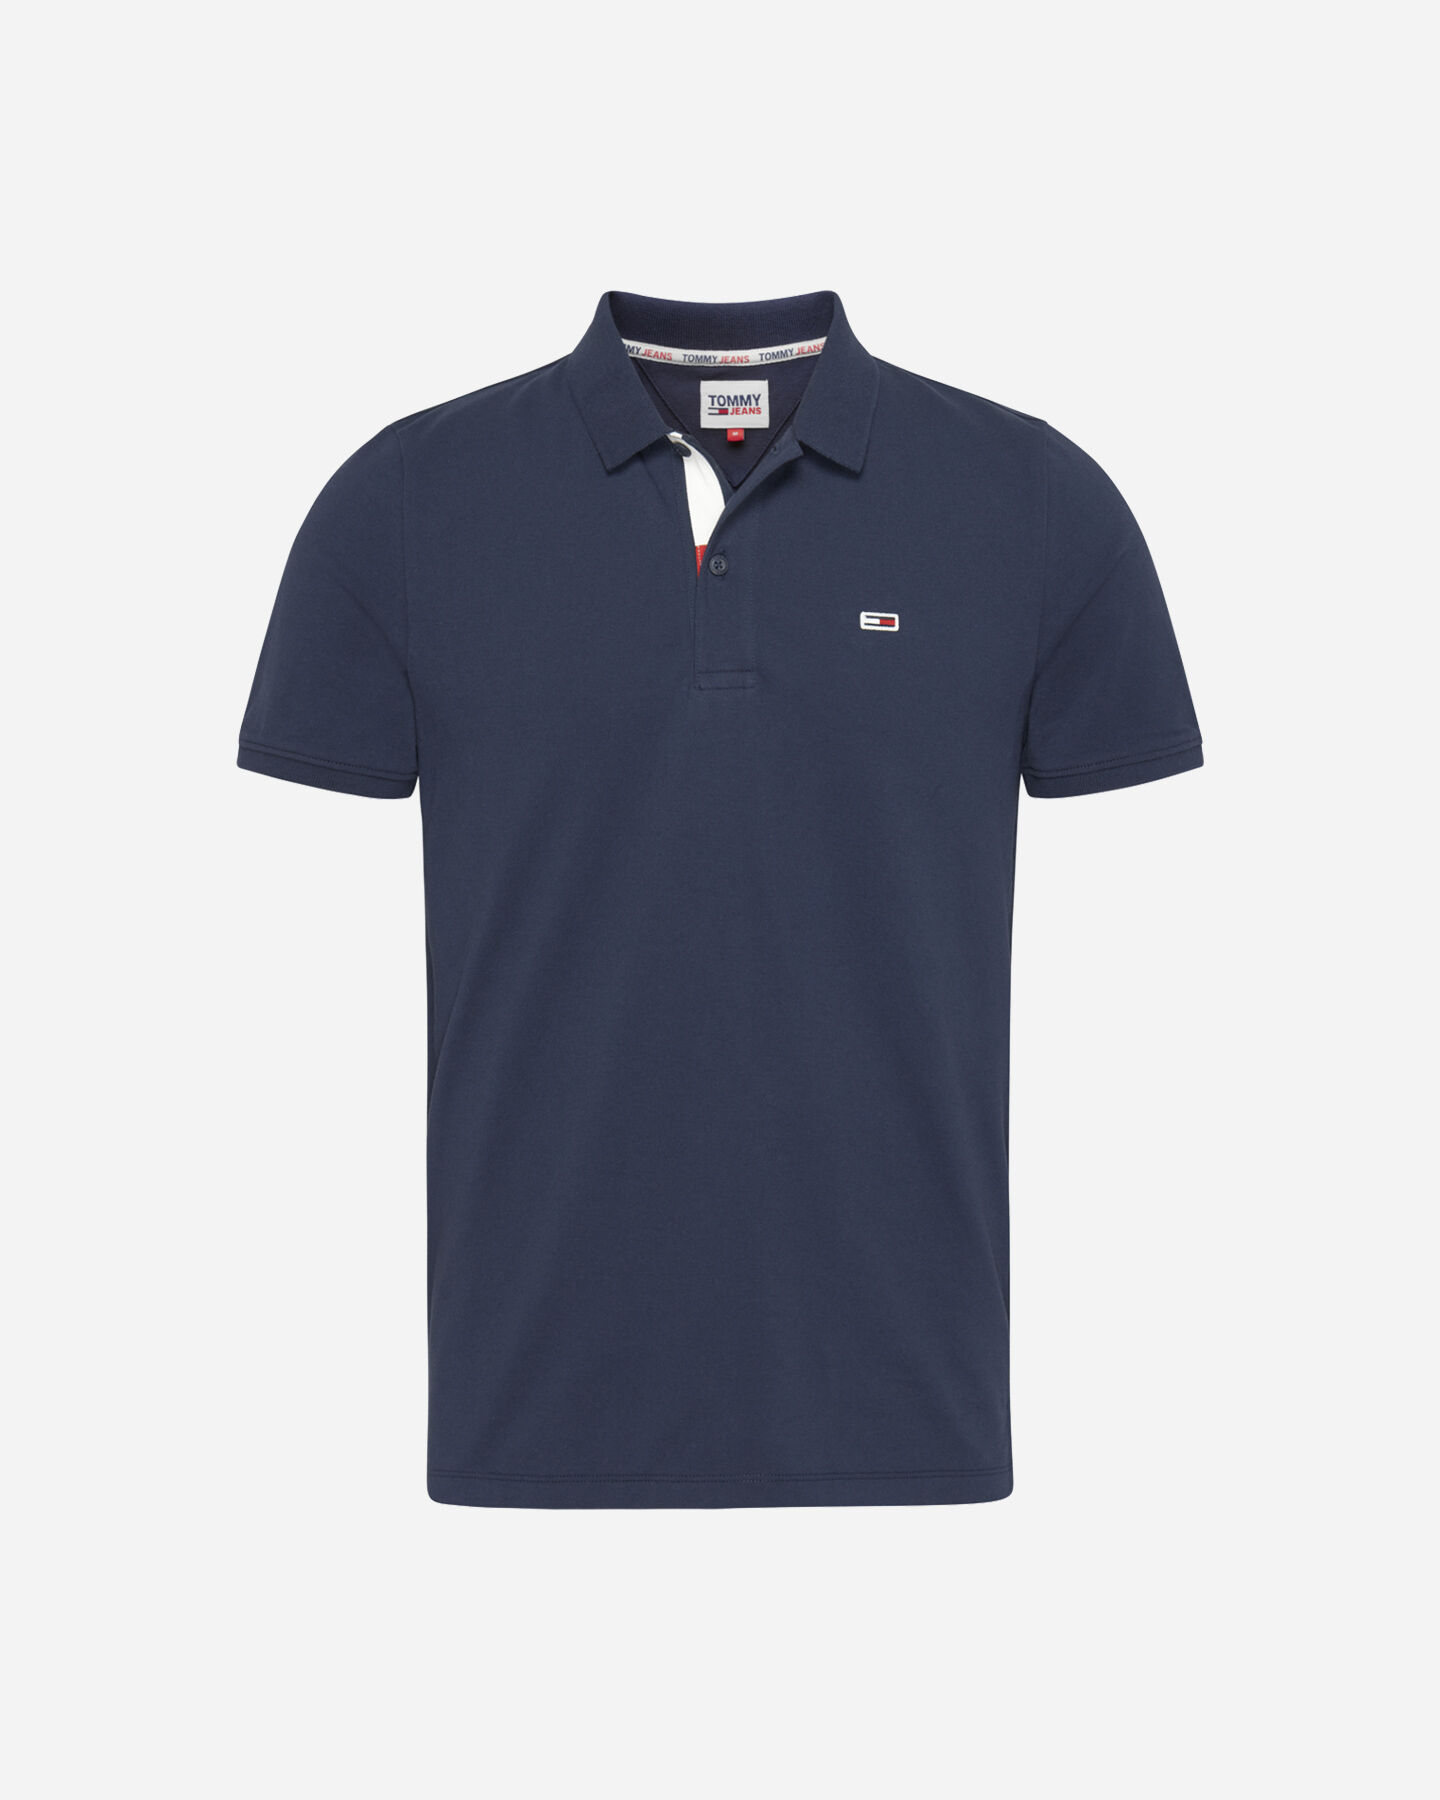  Polo TOMMY HILFIGER CLASSICS SOLID STRETCH M S4112929|C87|S scatto 0